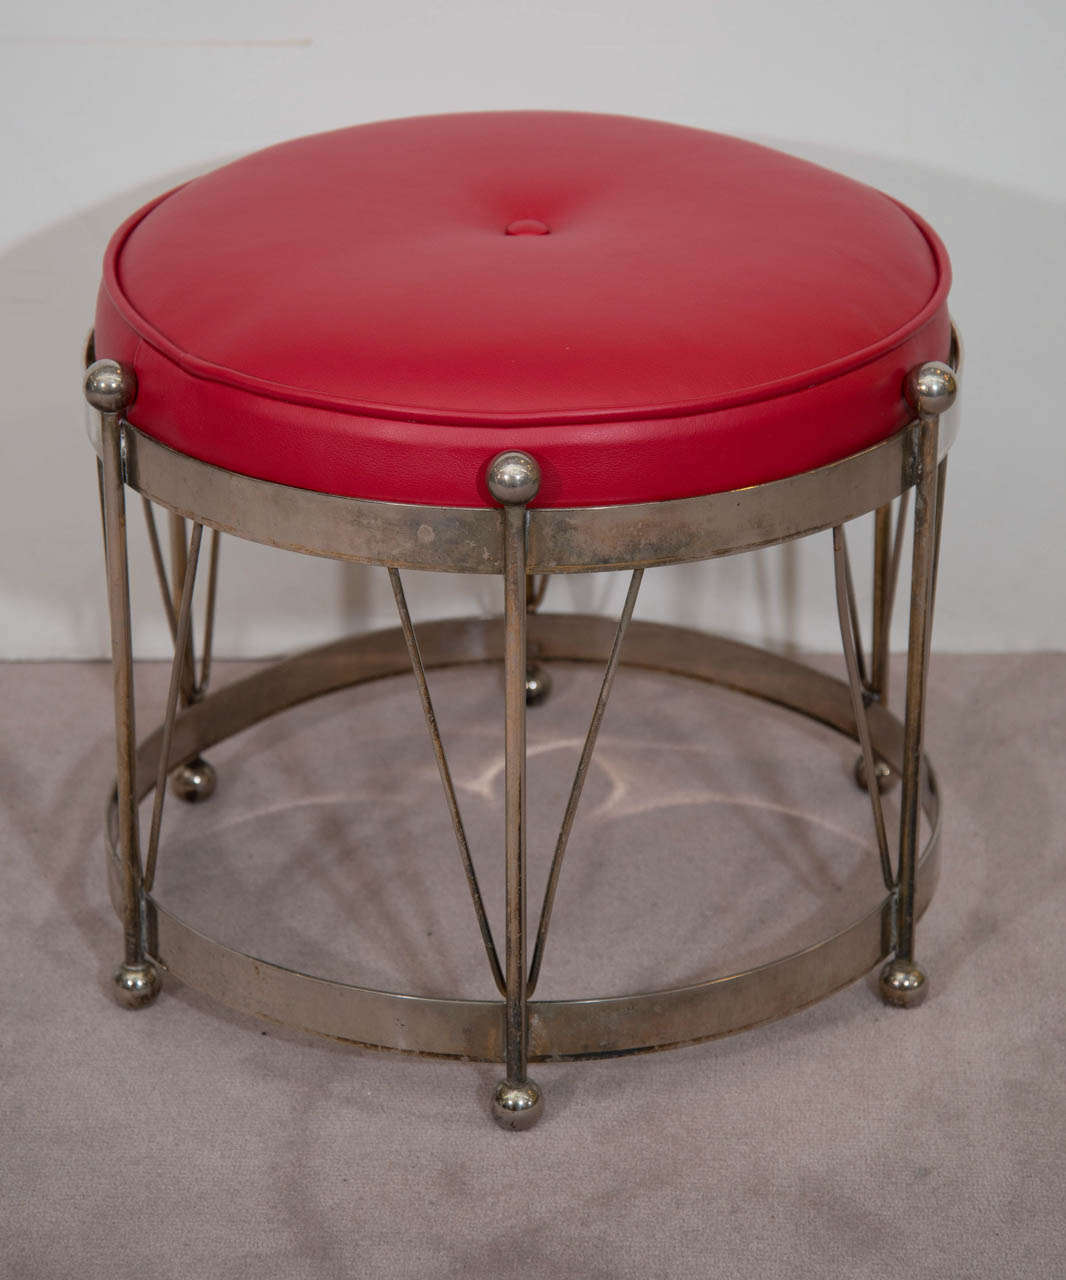 A vintage red leather upholstered drum bench with chrome frame and ball accents.  Good vintage condition with age appropriate wear. Some discoloration and scratches to chrome surface.

Reduced from: $975